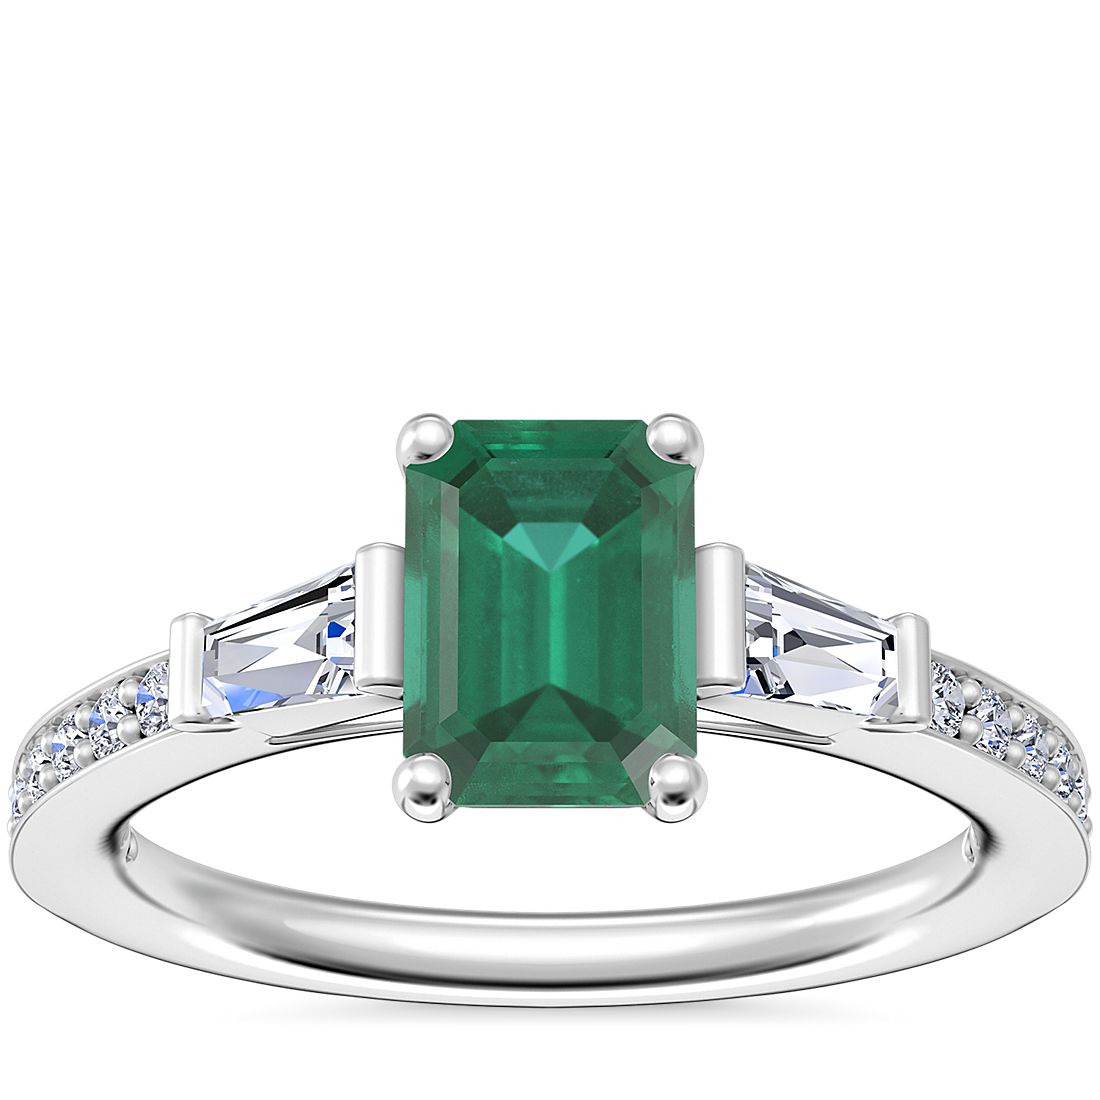 3.50 Ct Baguette Cut Diamond & Green Emerald Channel Set Ring 14K Yellow Gold Finish All Ring Sizes Are Available Here